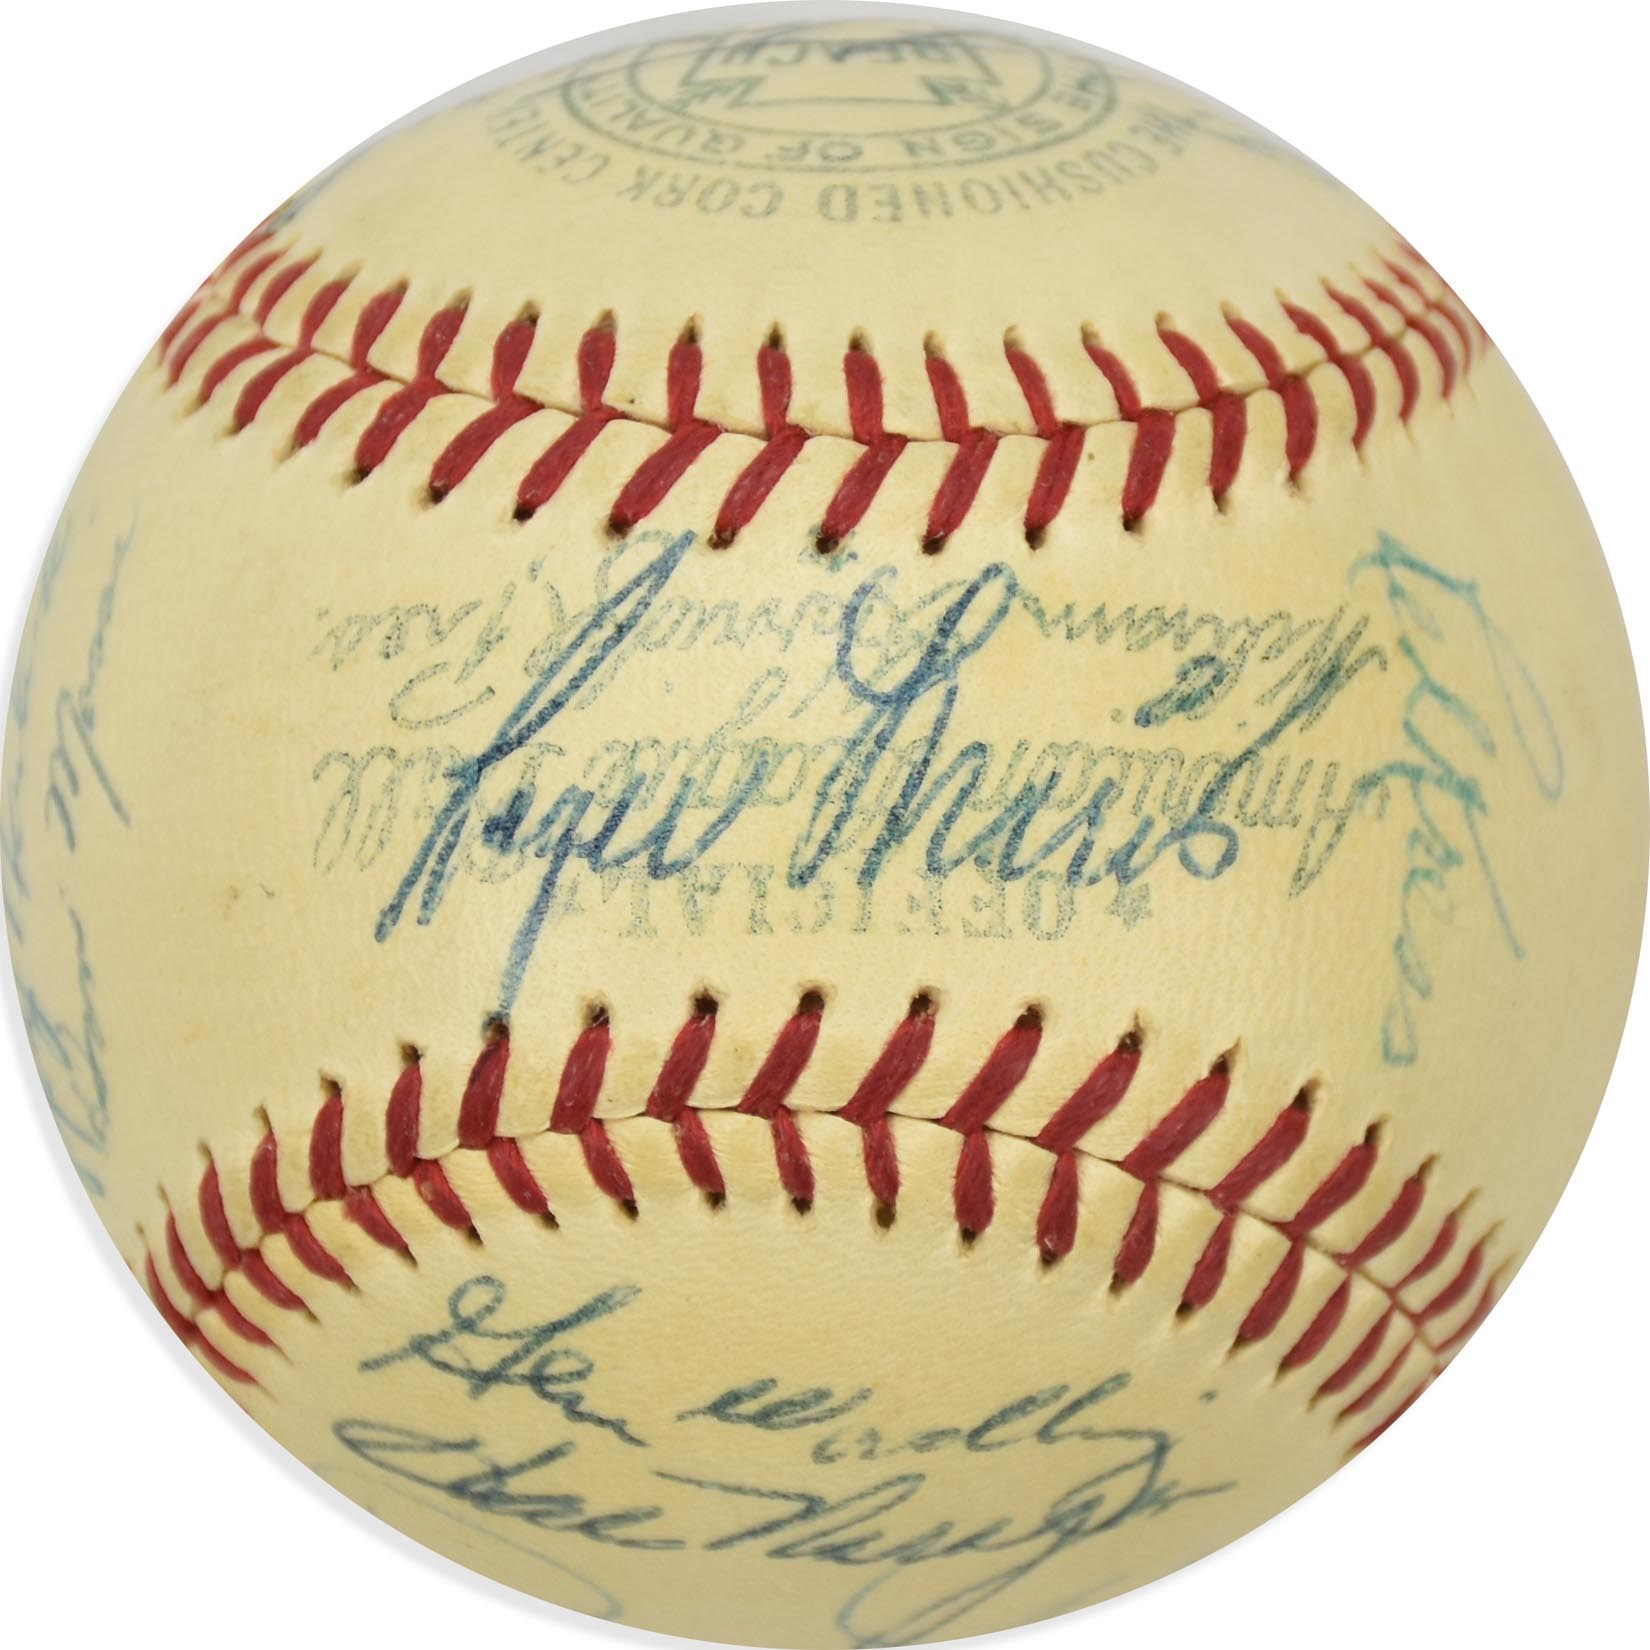 Baseball Autographs - 1957 Cleveland Indians Team-Signed Baseball with Rookie Roger Maris